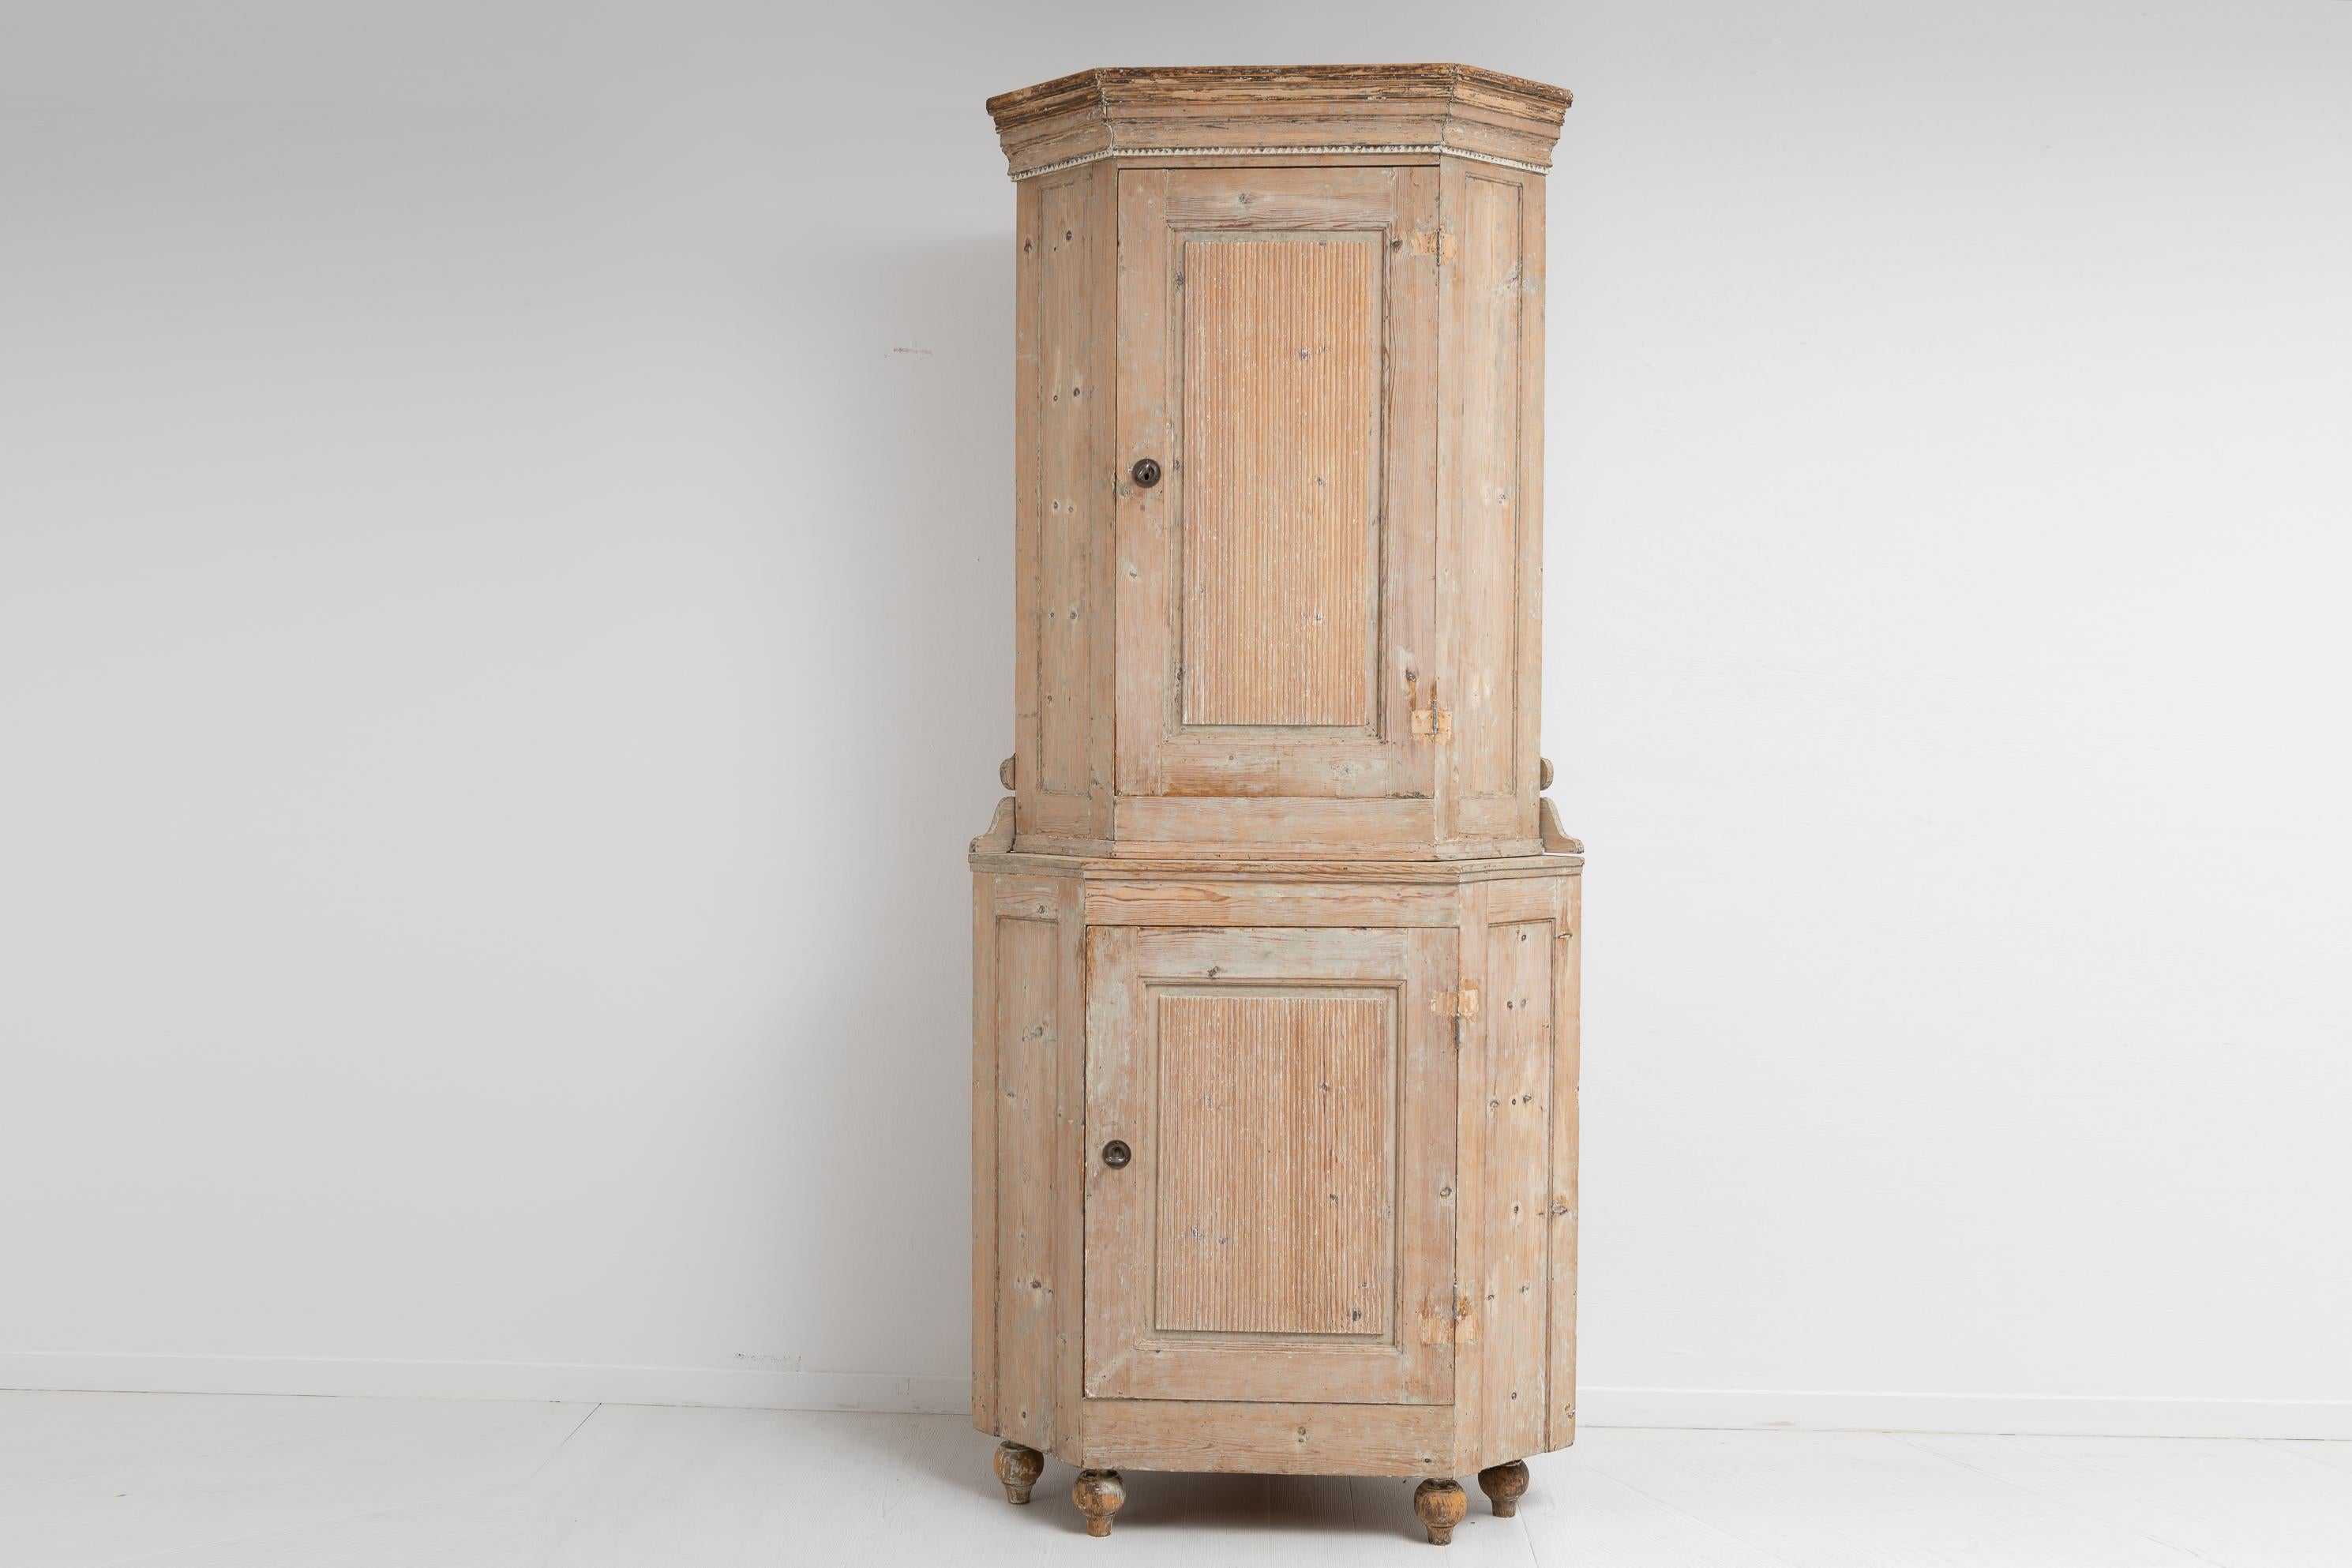 Northern Swedish gustavian corner cabinet from the late 1700s, 1790 to 1800. The cabinet is pine with traces of the original paint. Typical gustavian angles and features such as the doors with ribbed decor. Interior shelves. The cabinet has a loose